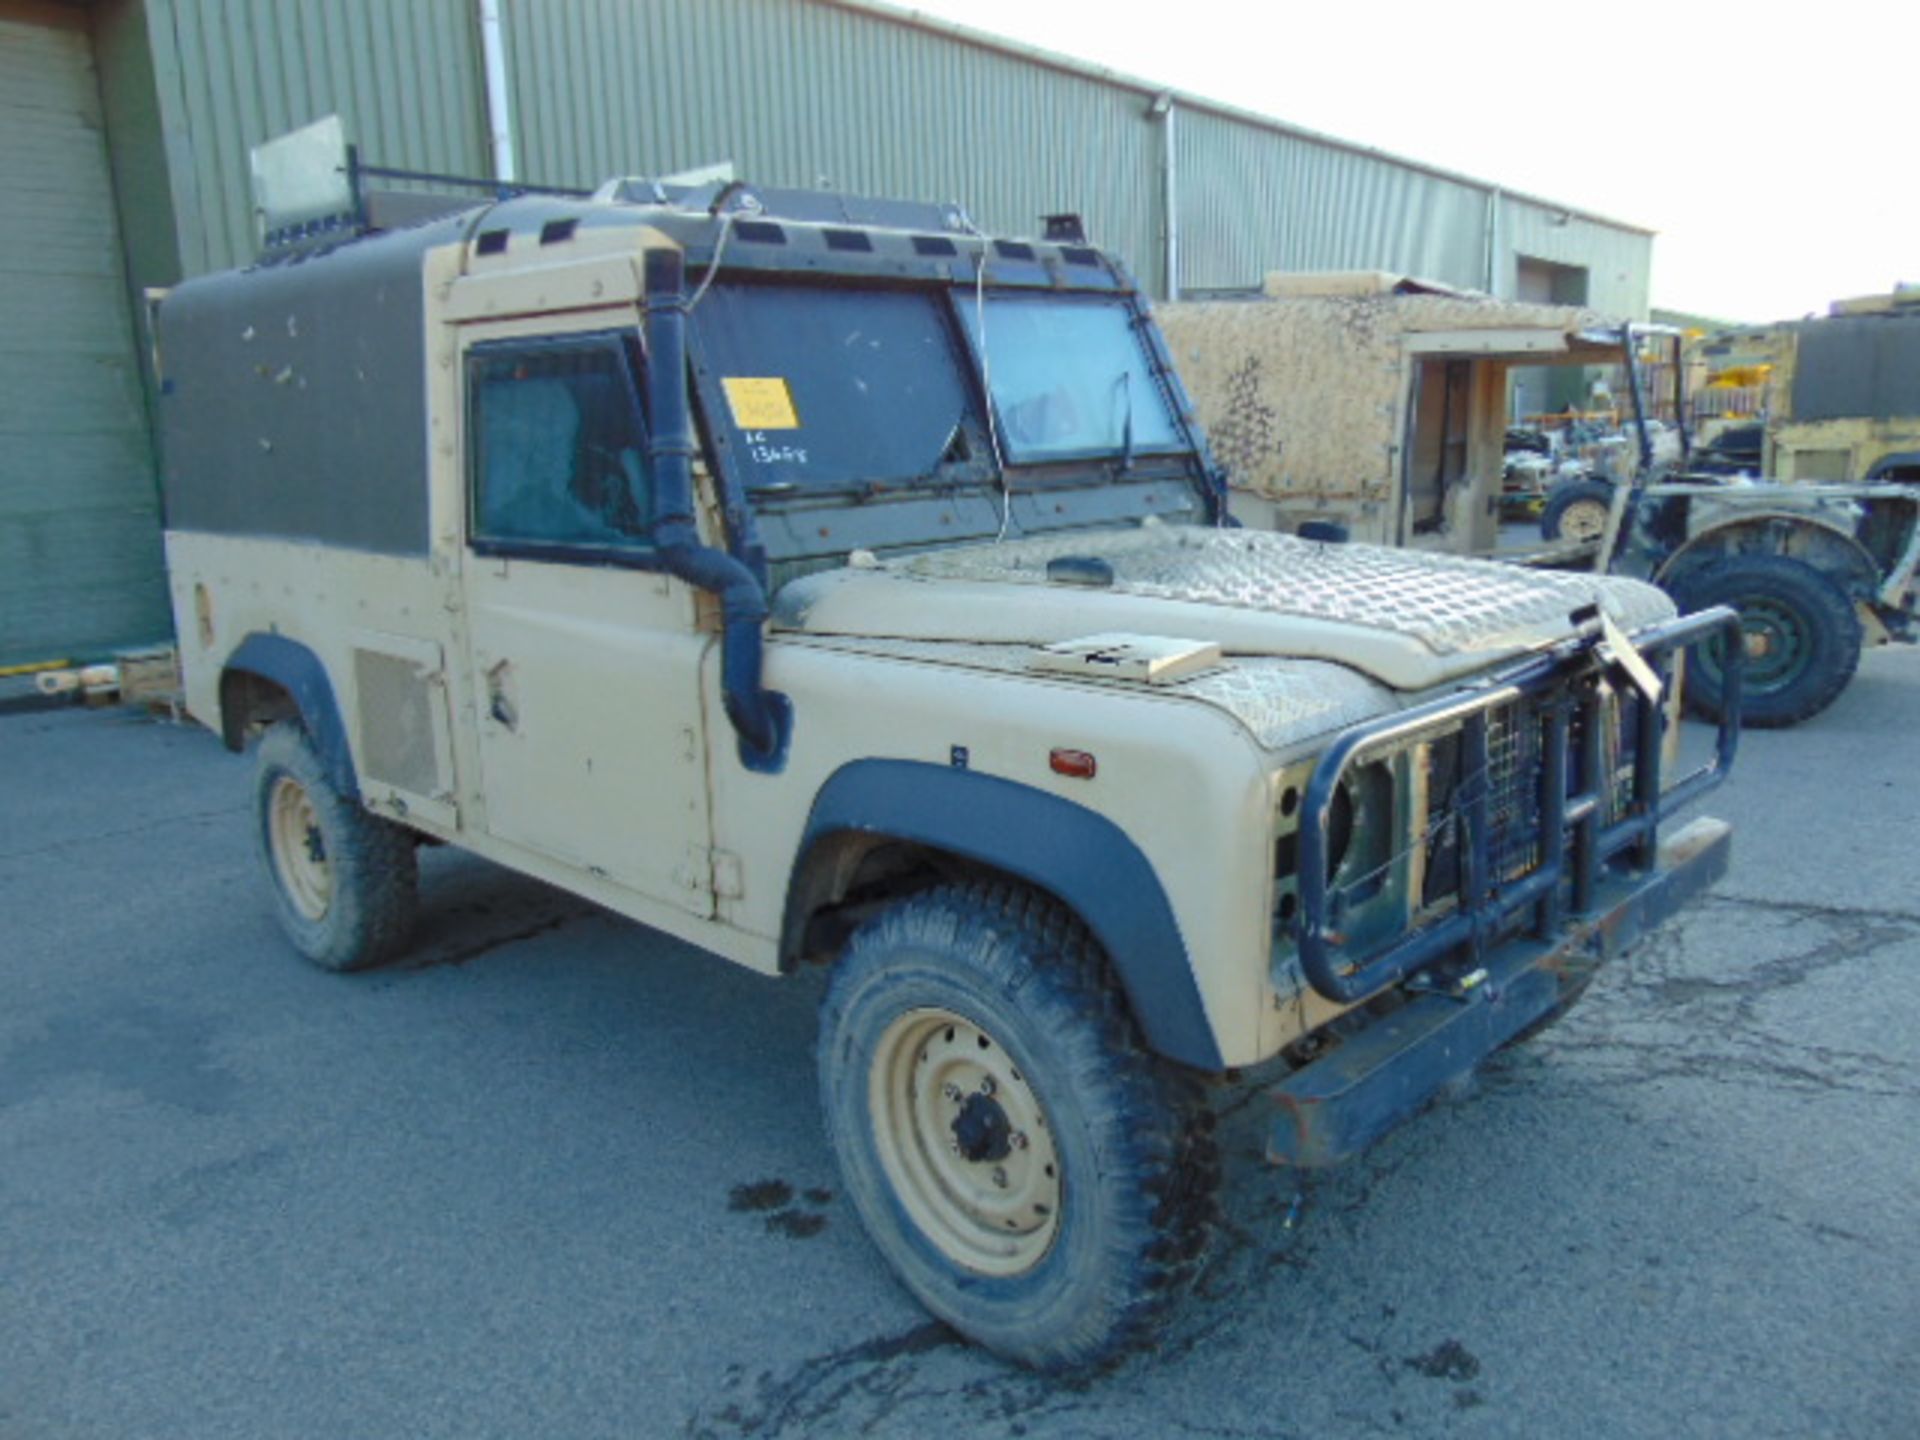 Very Rare Direct from Service Unmanned Landrover 110 300TDi Panama Snatch-2A